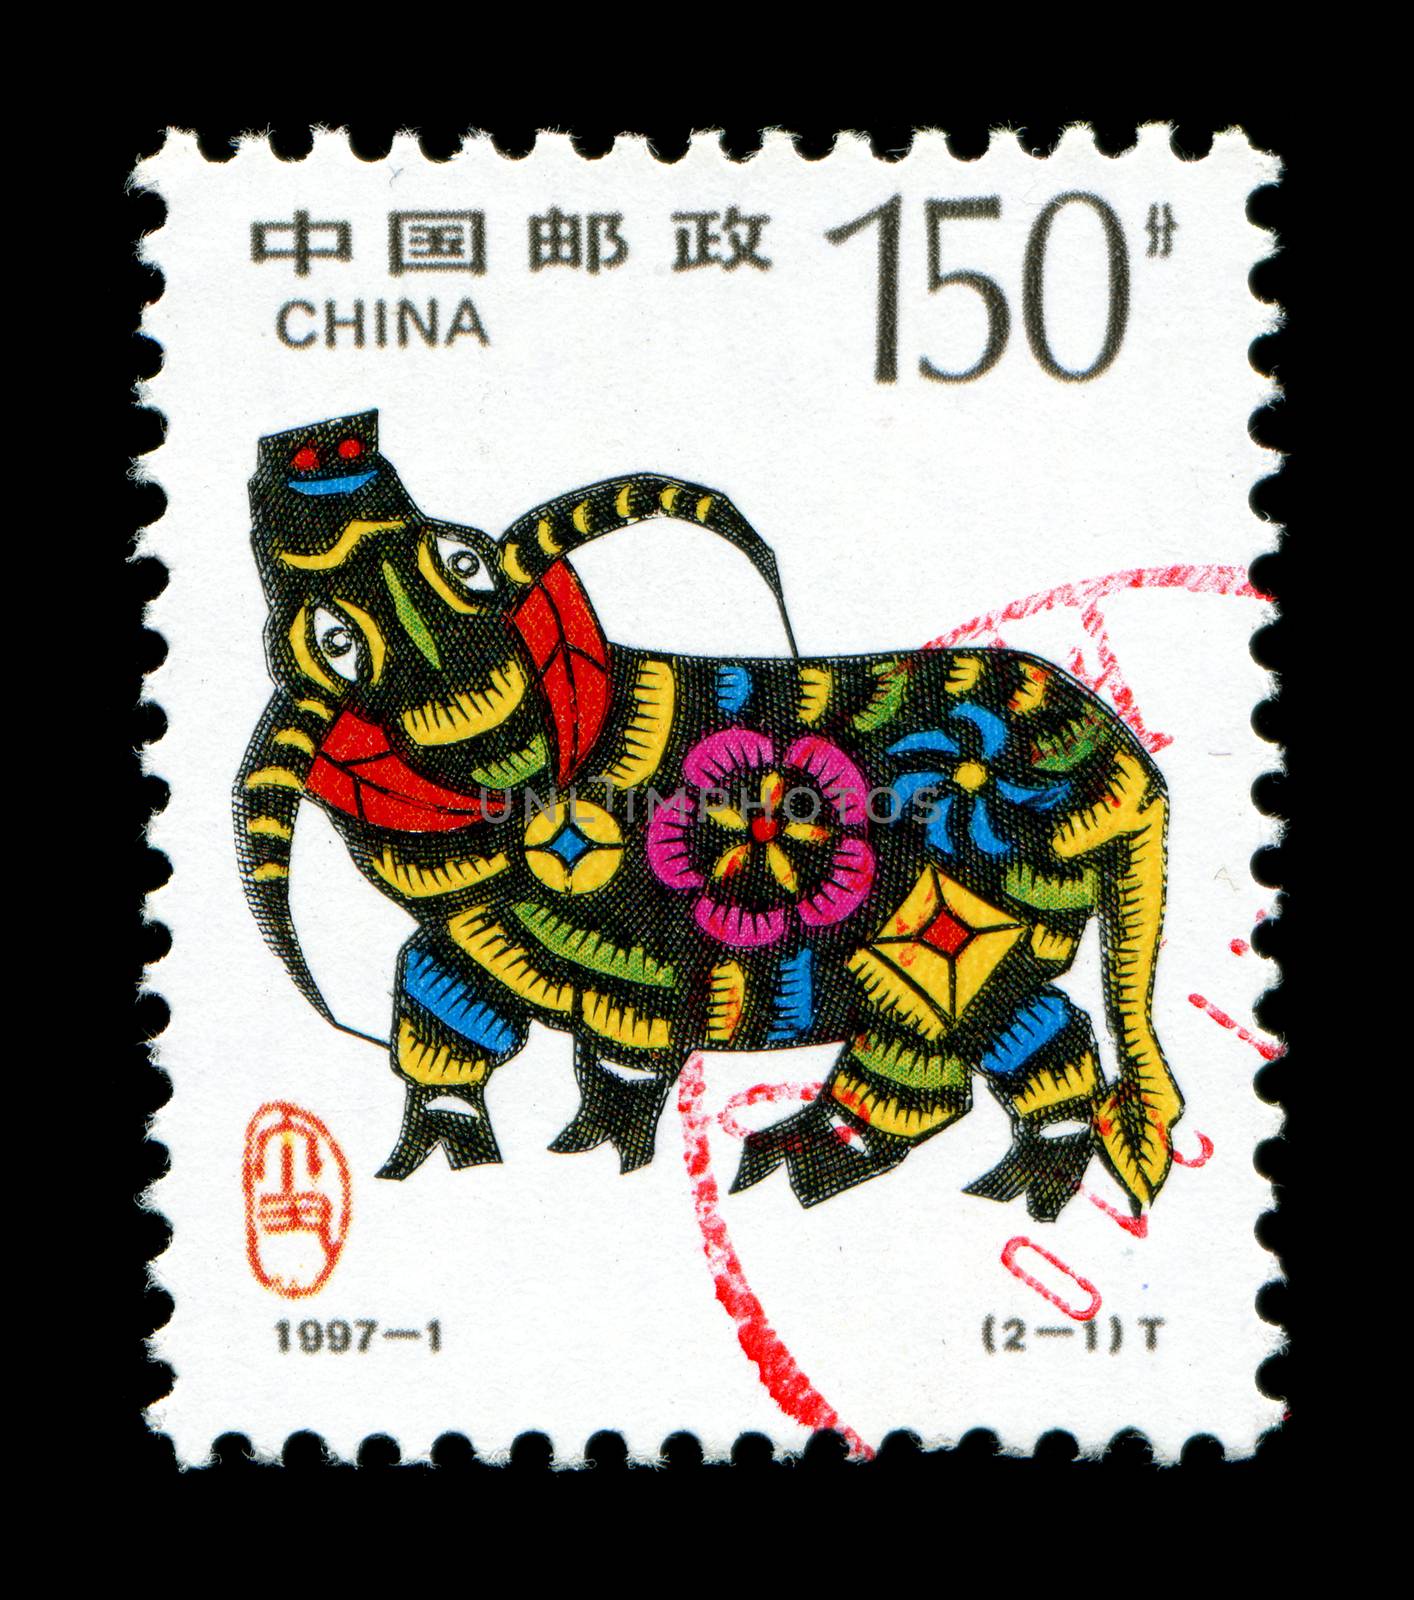 CHINA - CIRCA 1997: A postage stamp printed in China shows 1997 Lunar Year of the Ox.The Ox is one of the 12-year cycle of animals which appear in the Chinese zodiac,circa 1997.